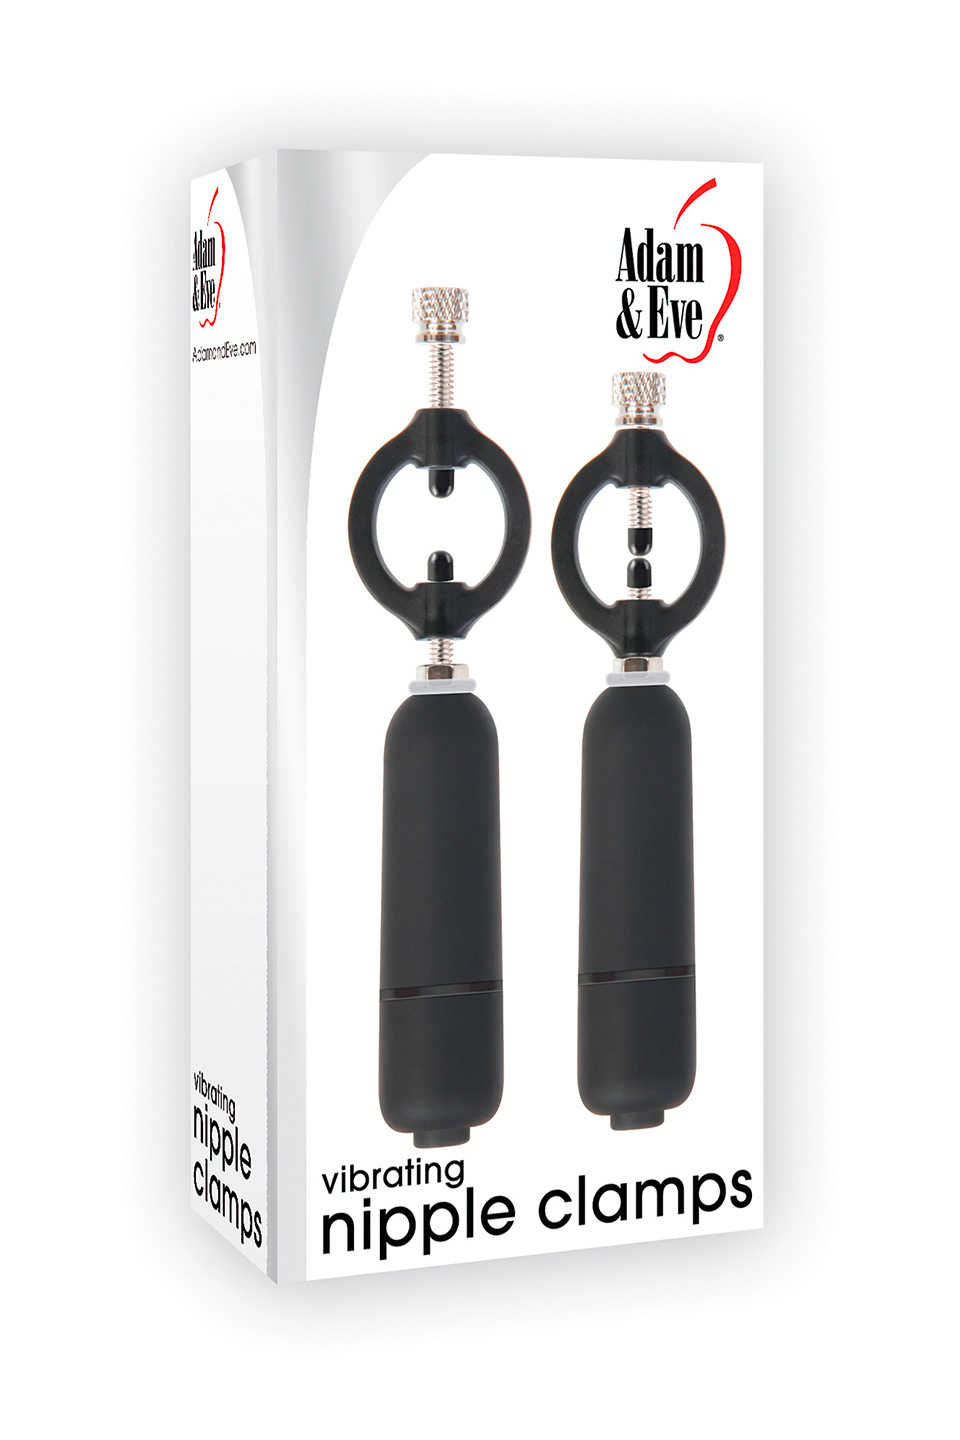 Adam and eve nipple clamps